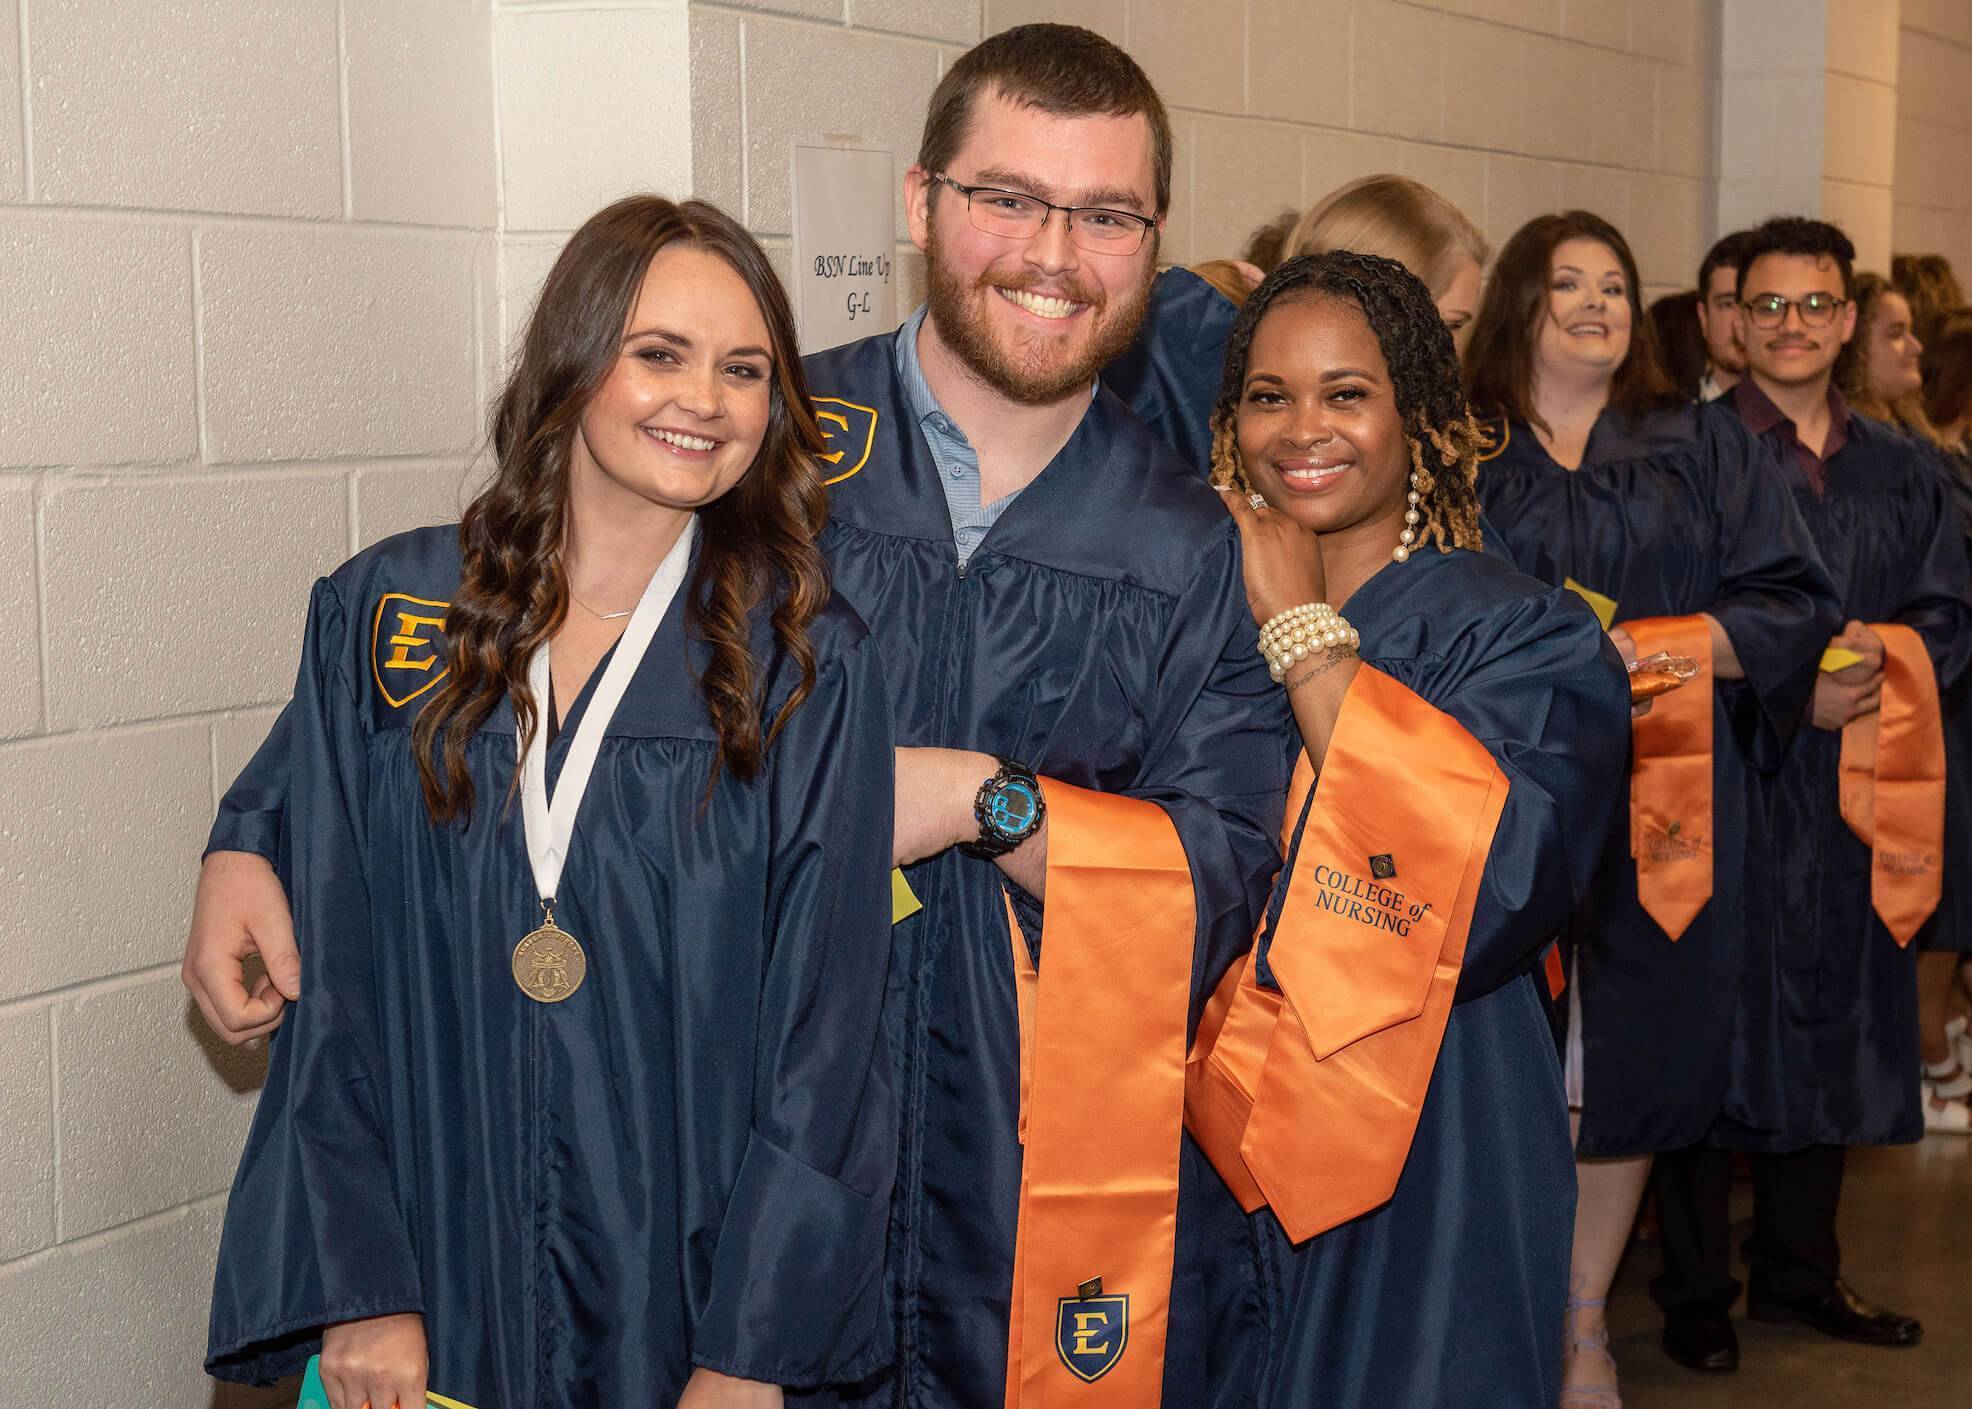 ETSU nursing students in graduation robes smiling for the camera.